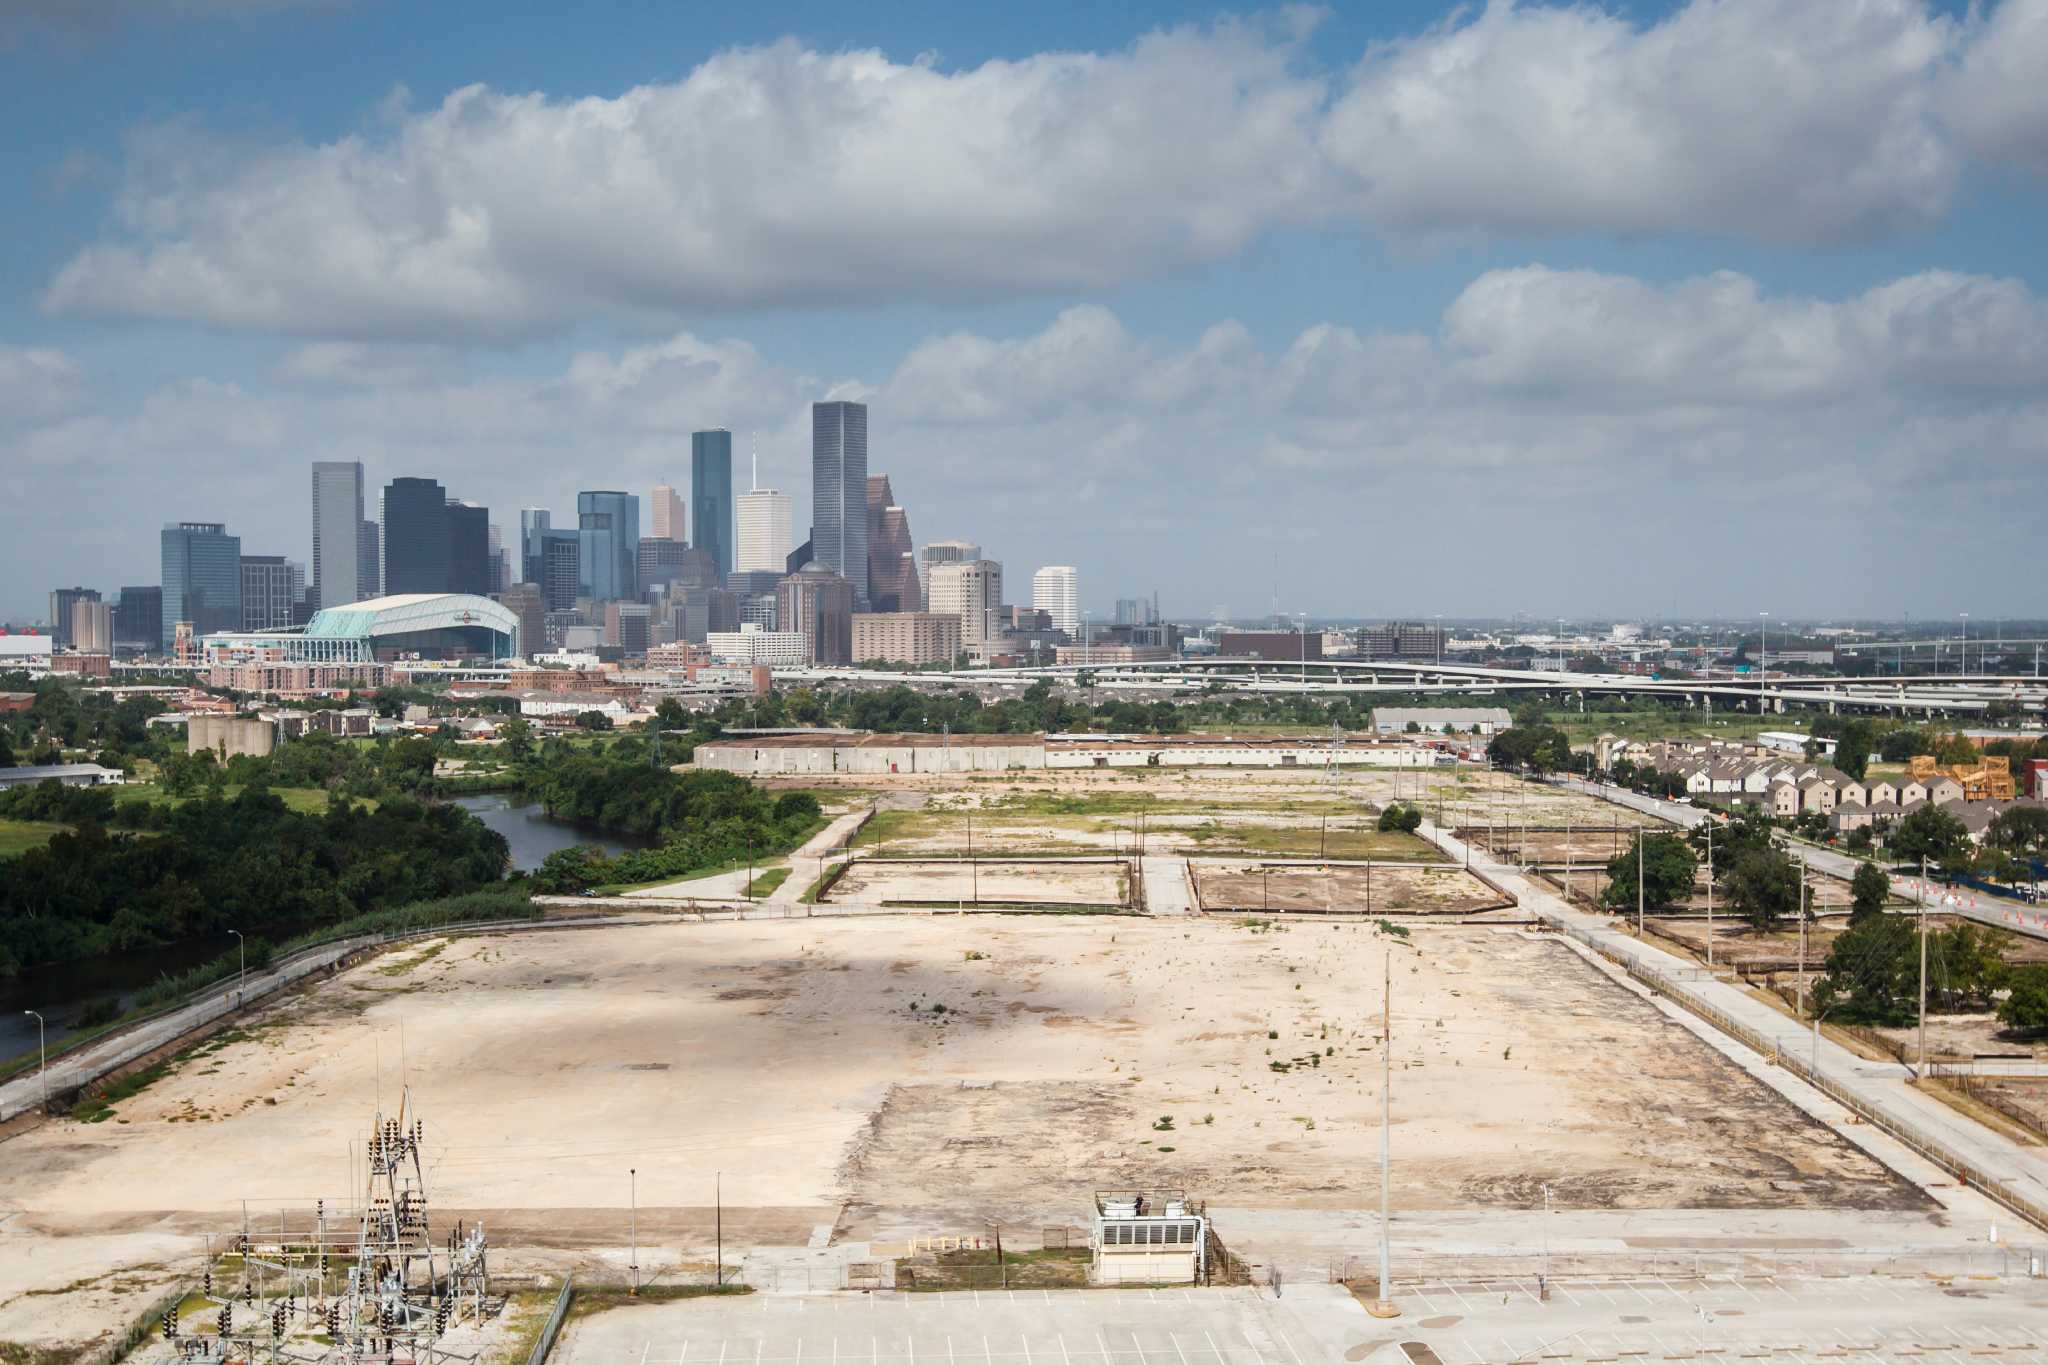 Property Called A Once In Lifetime Opportunity Houston Chronicle